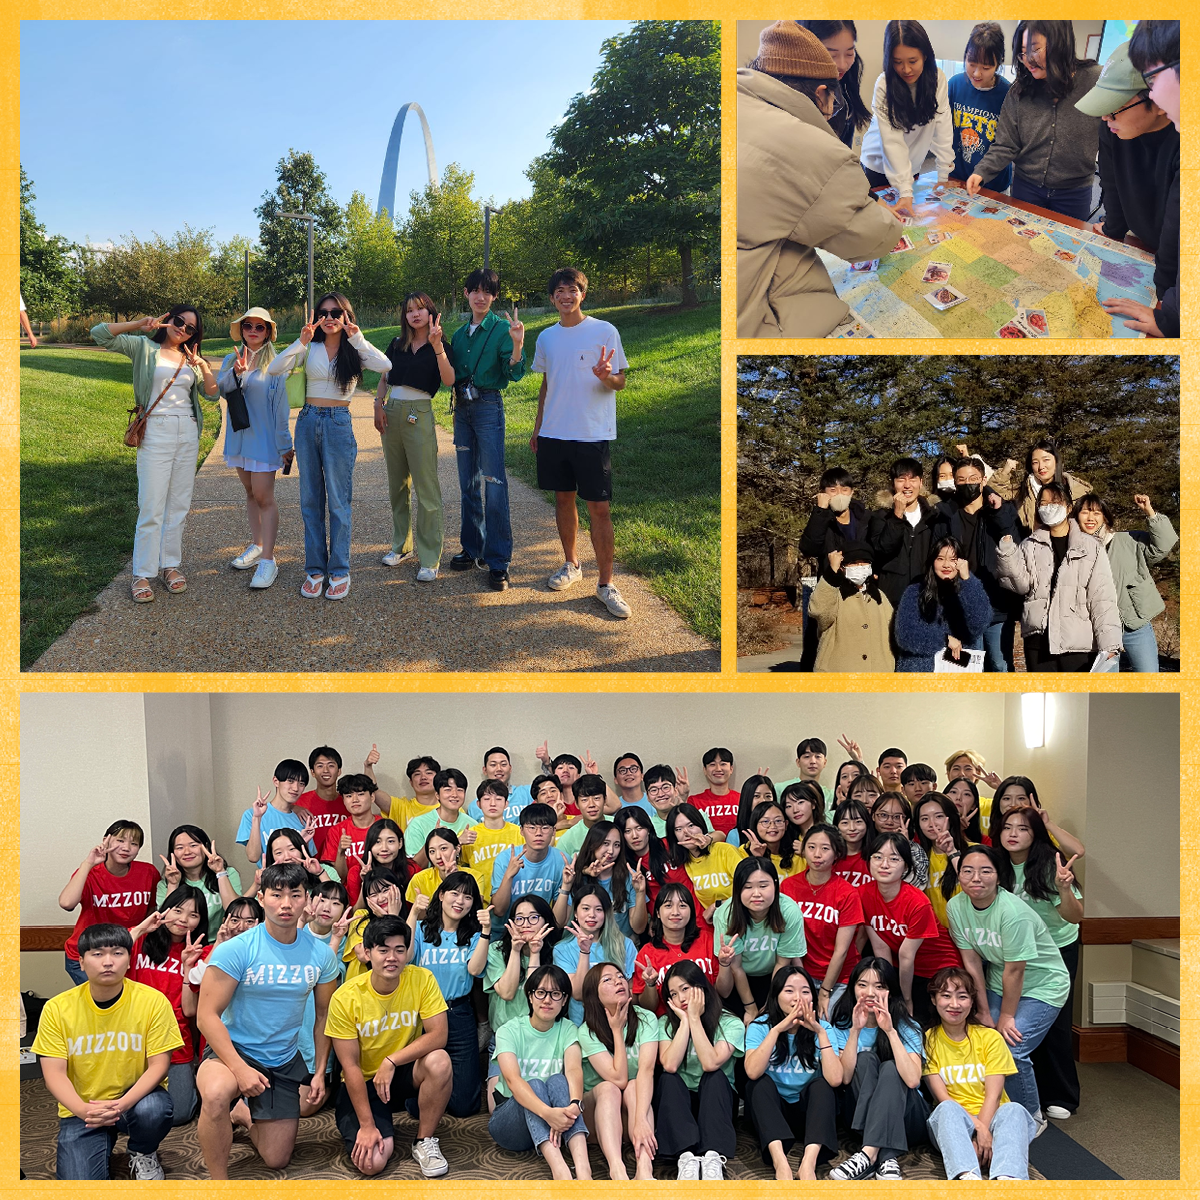 Photo collage shows groups of students participating in program activities.